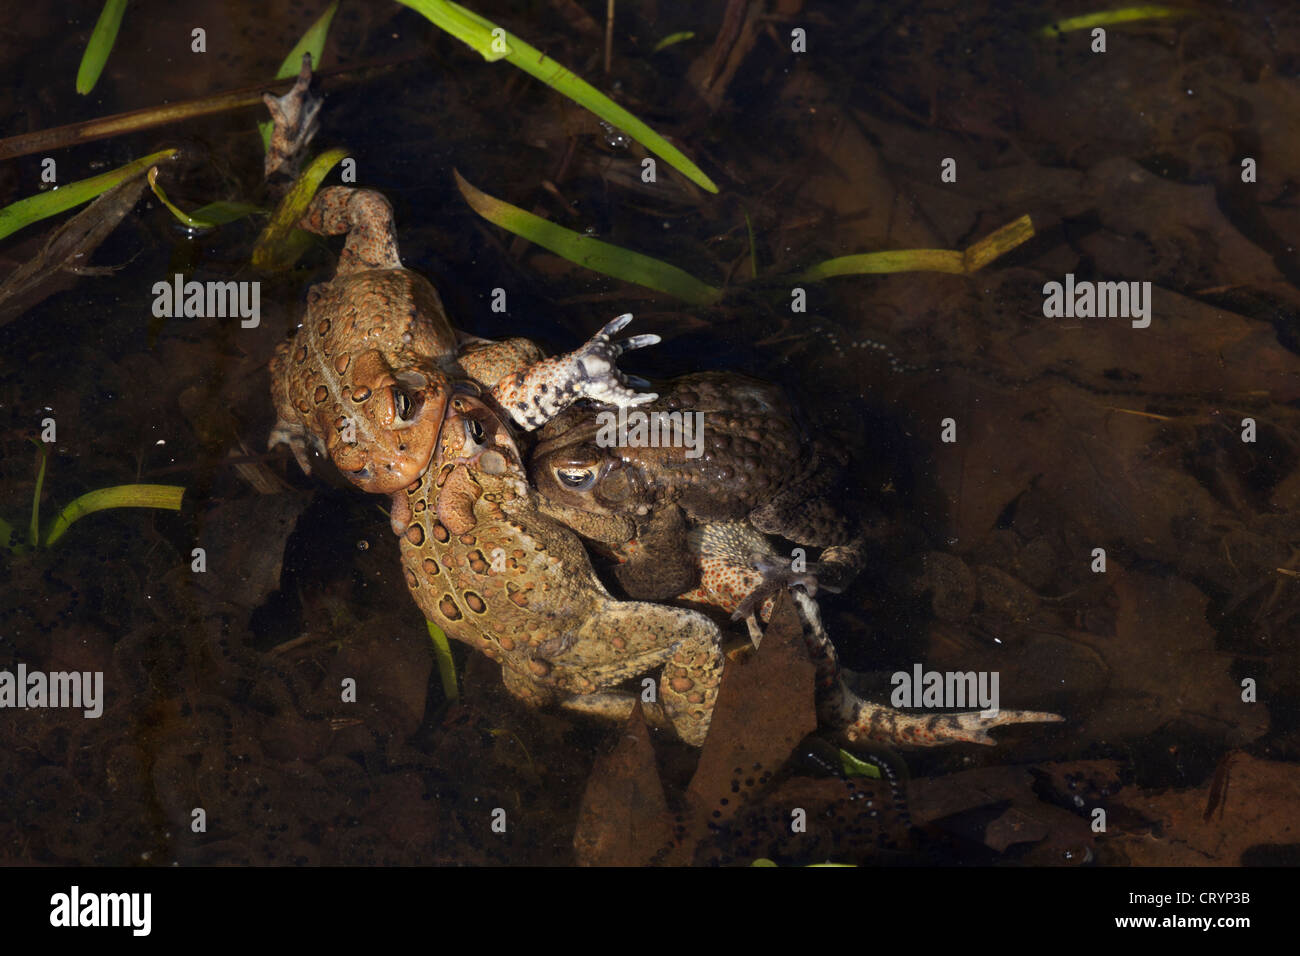 American toad , Bufo americanus , New York , toad ball, males attempting to mate with female, Stock Photo